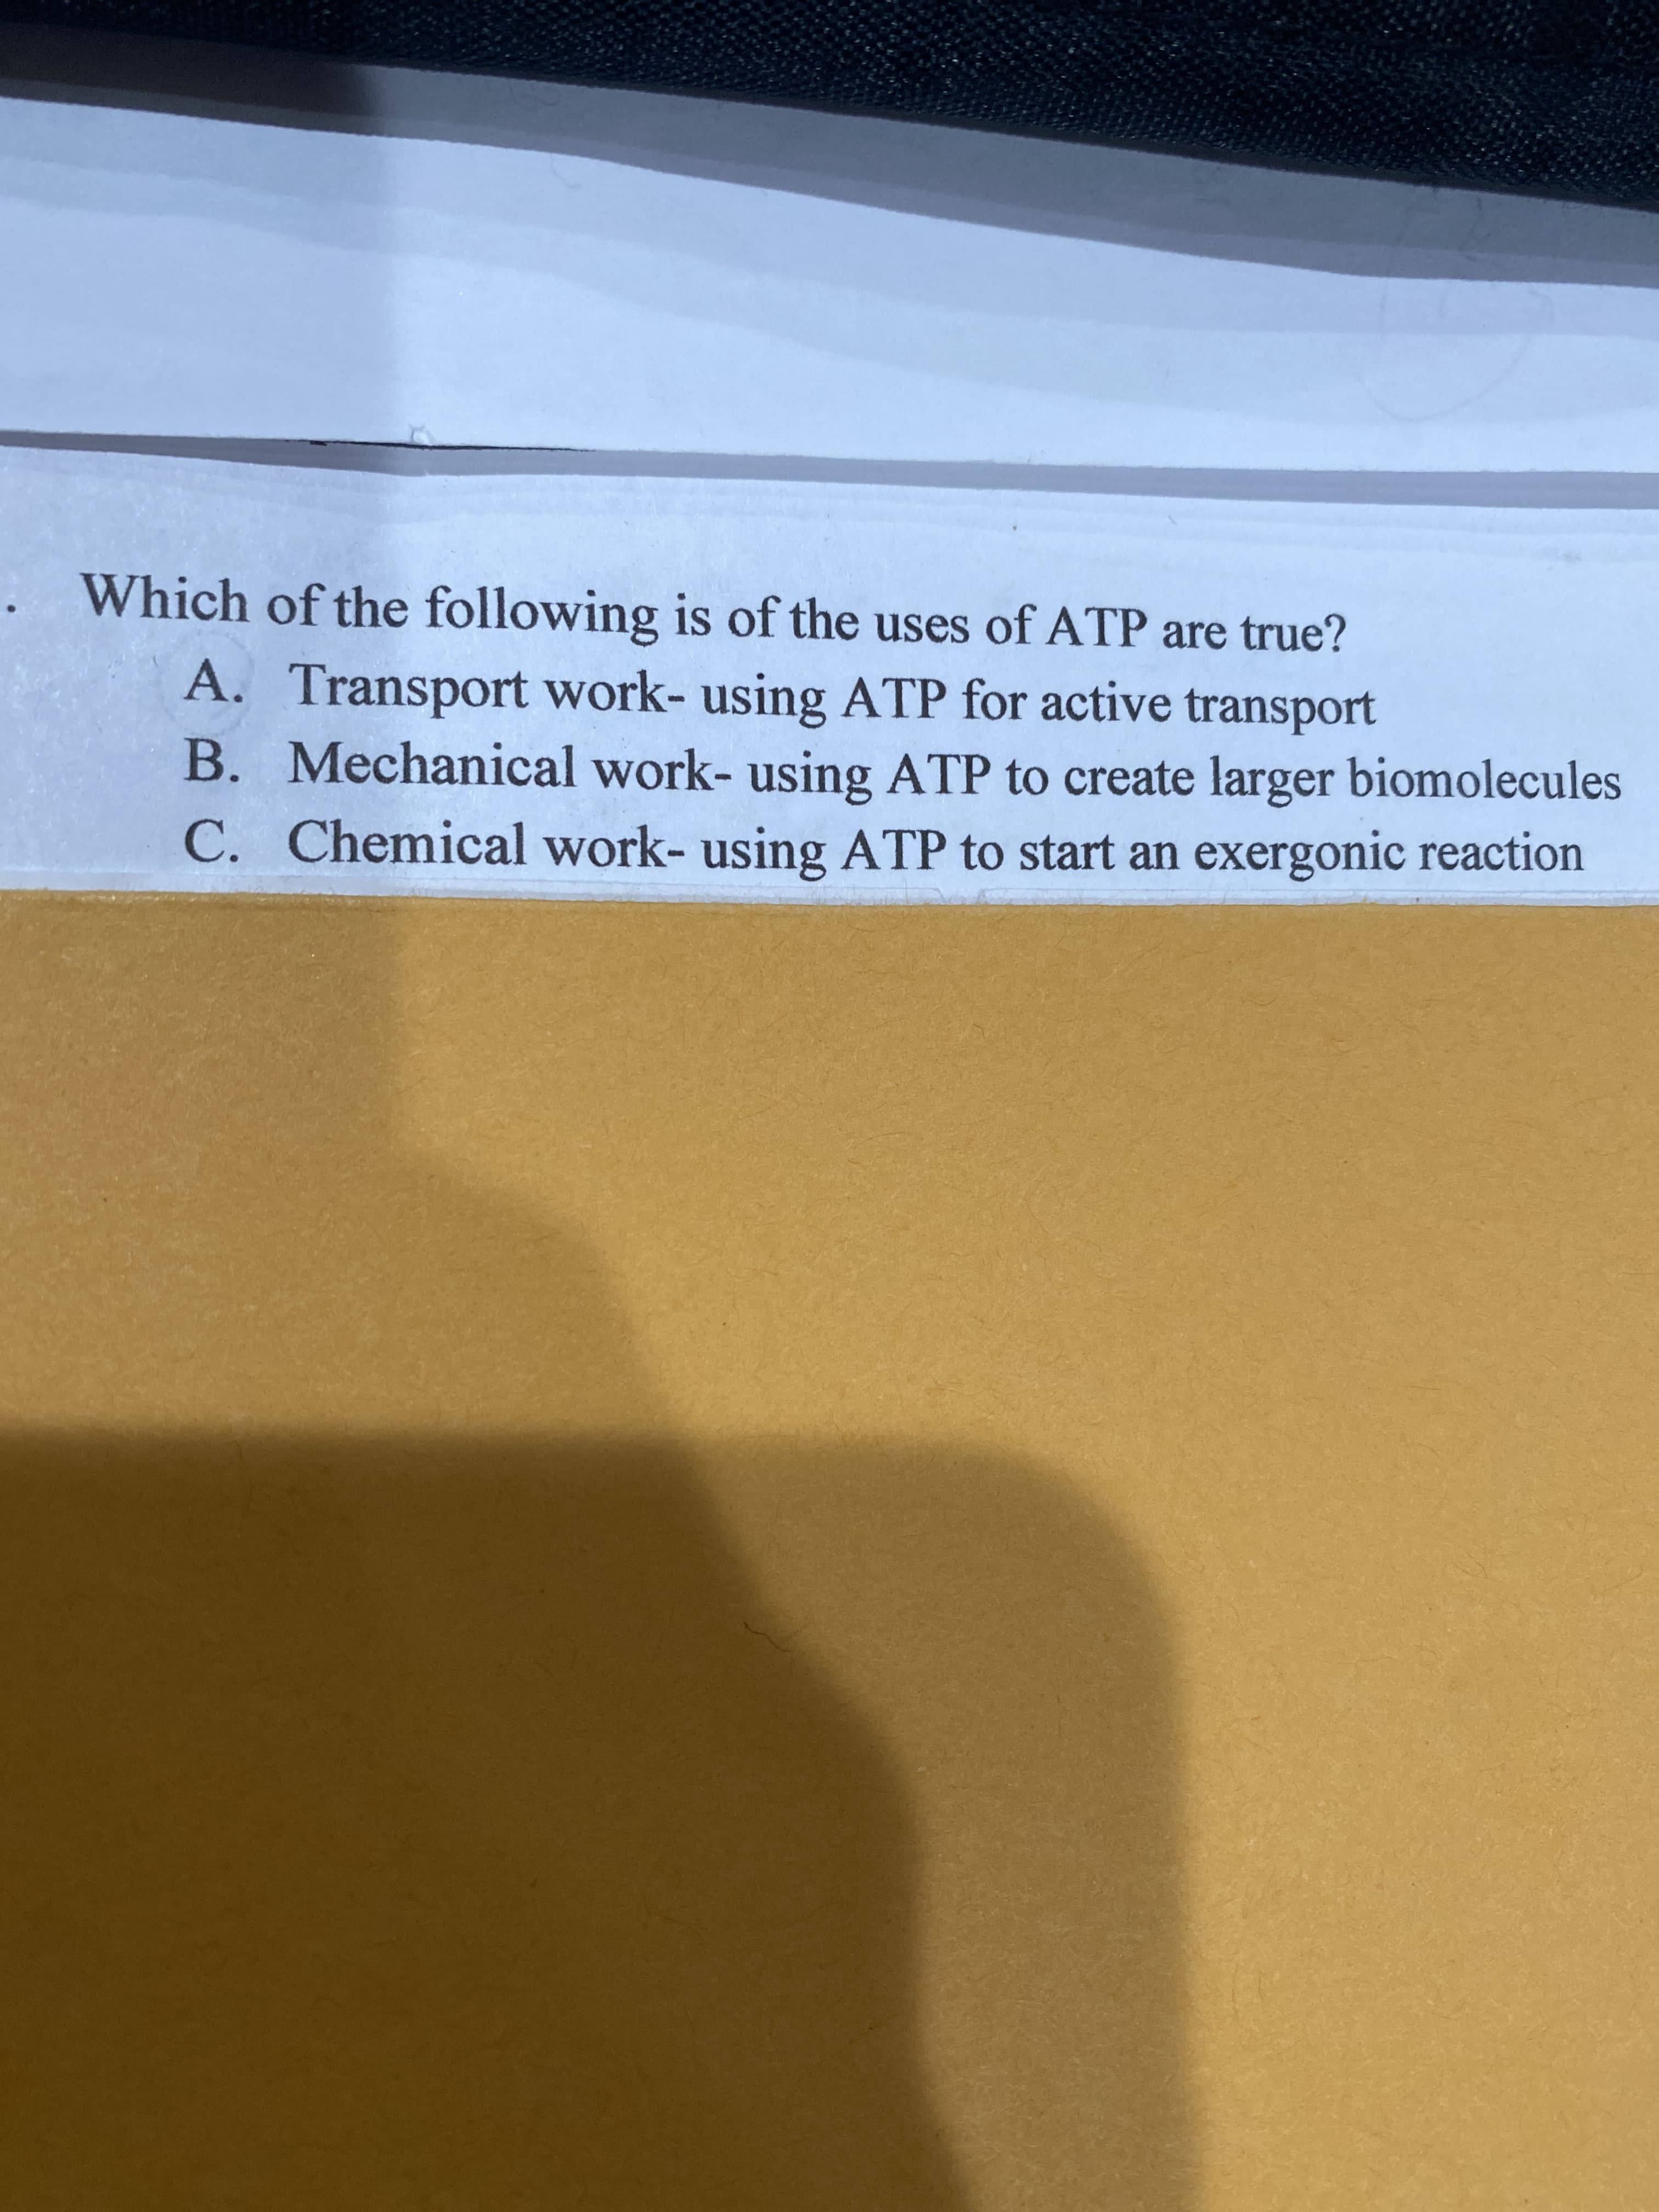 Which of the following is of the uses of ATP are true?
A. Transport work- using ATP for active transport
B. Mechanical work- using ATP to create larger biomolecules
C. Chemical work- using ATP to start an exergonic reaction
